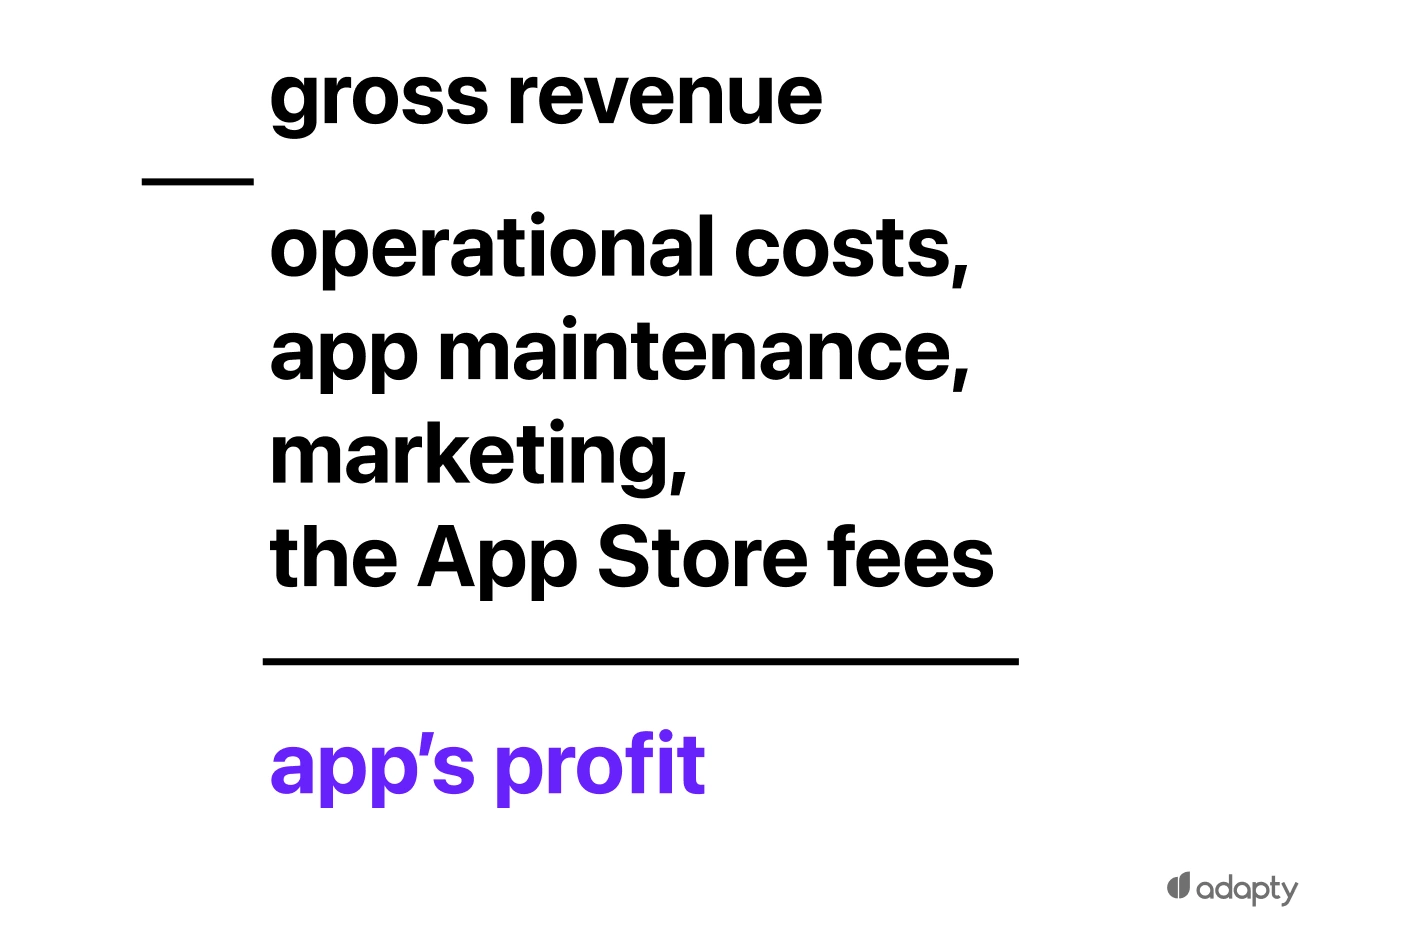 how to count app's profit